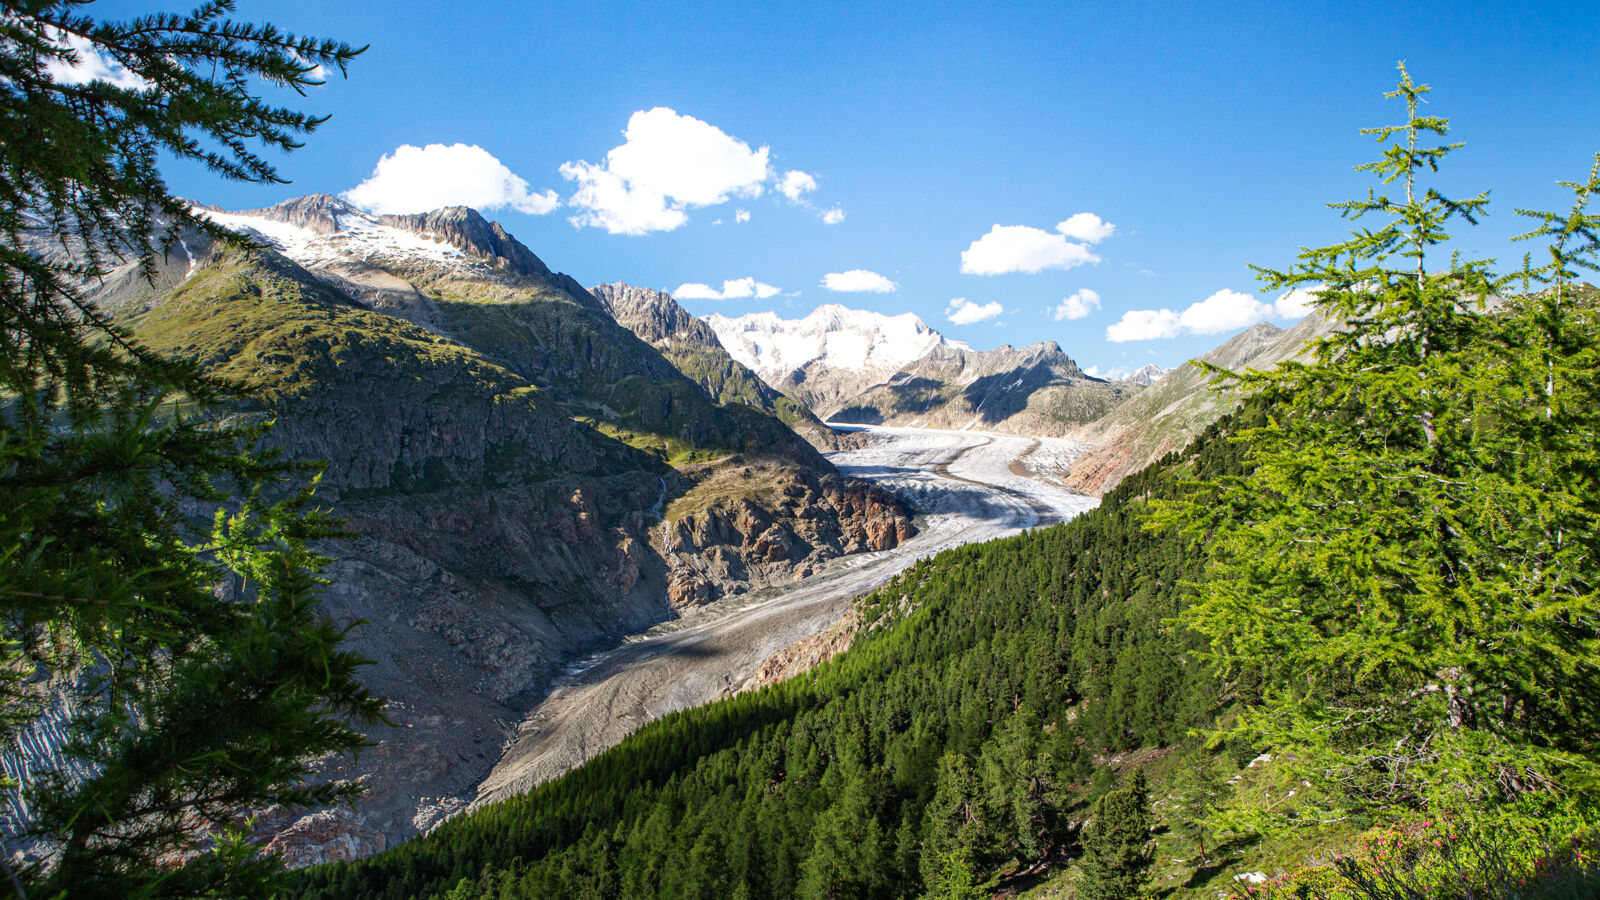 Aletsch forest – forest at the glacier's edge